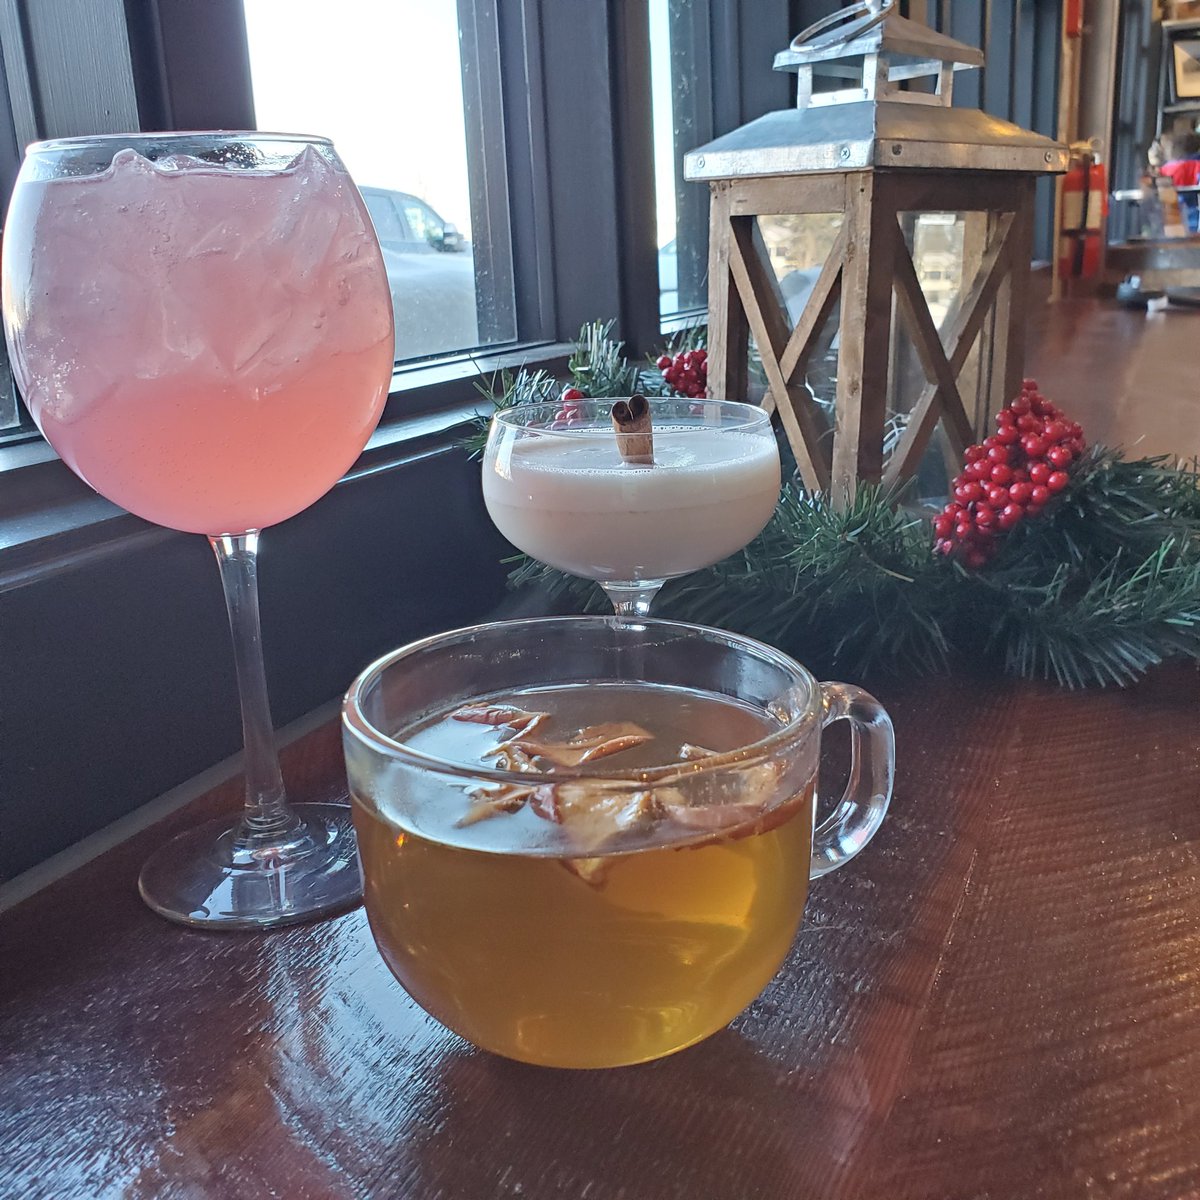 Look at these beauties from @EauClaireCraft's #christmascocktail menu. Stay tuned for Savour's Christmas Cocktail Roundup this week!